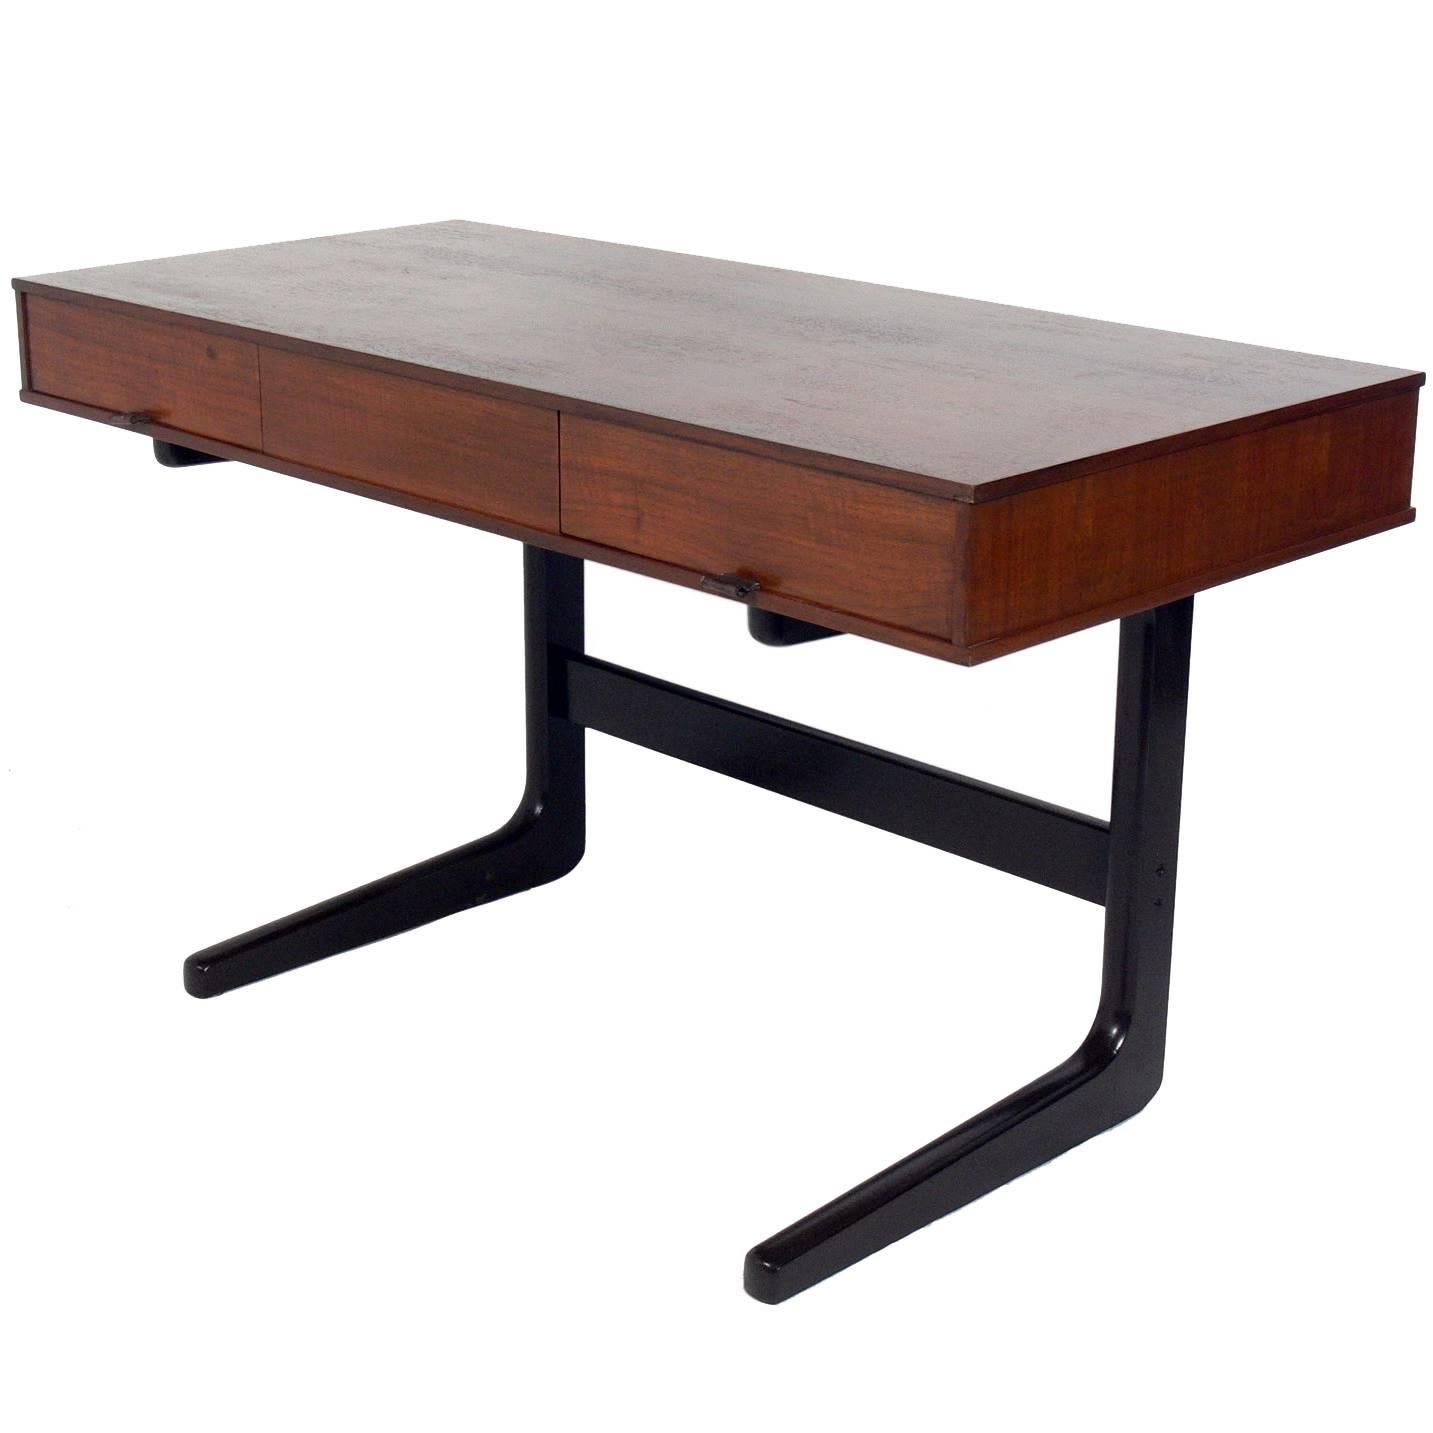 Clean Lined Midcentury Desk with Leather Pulls